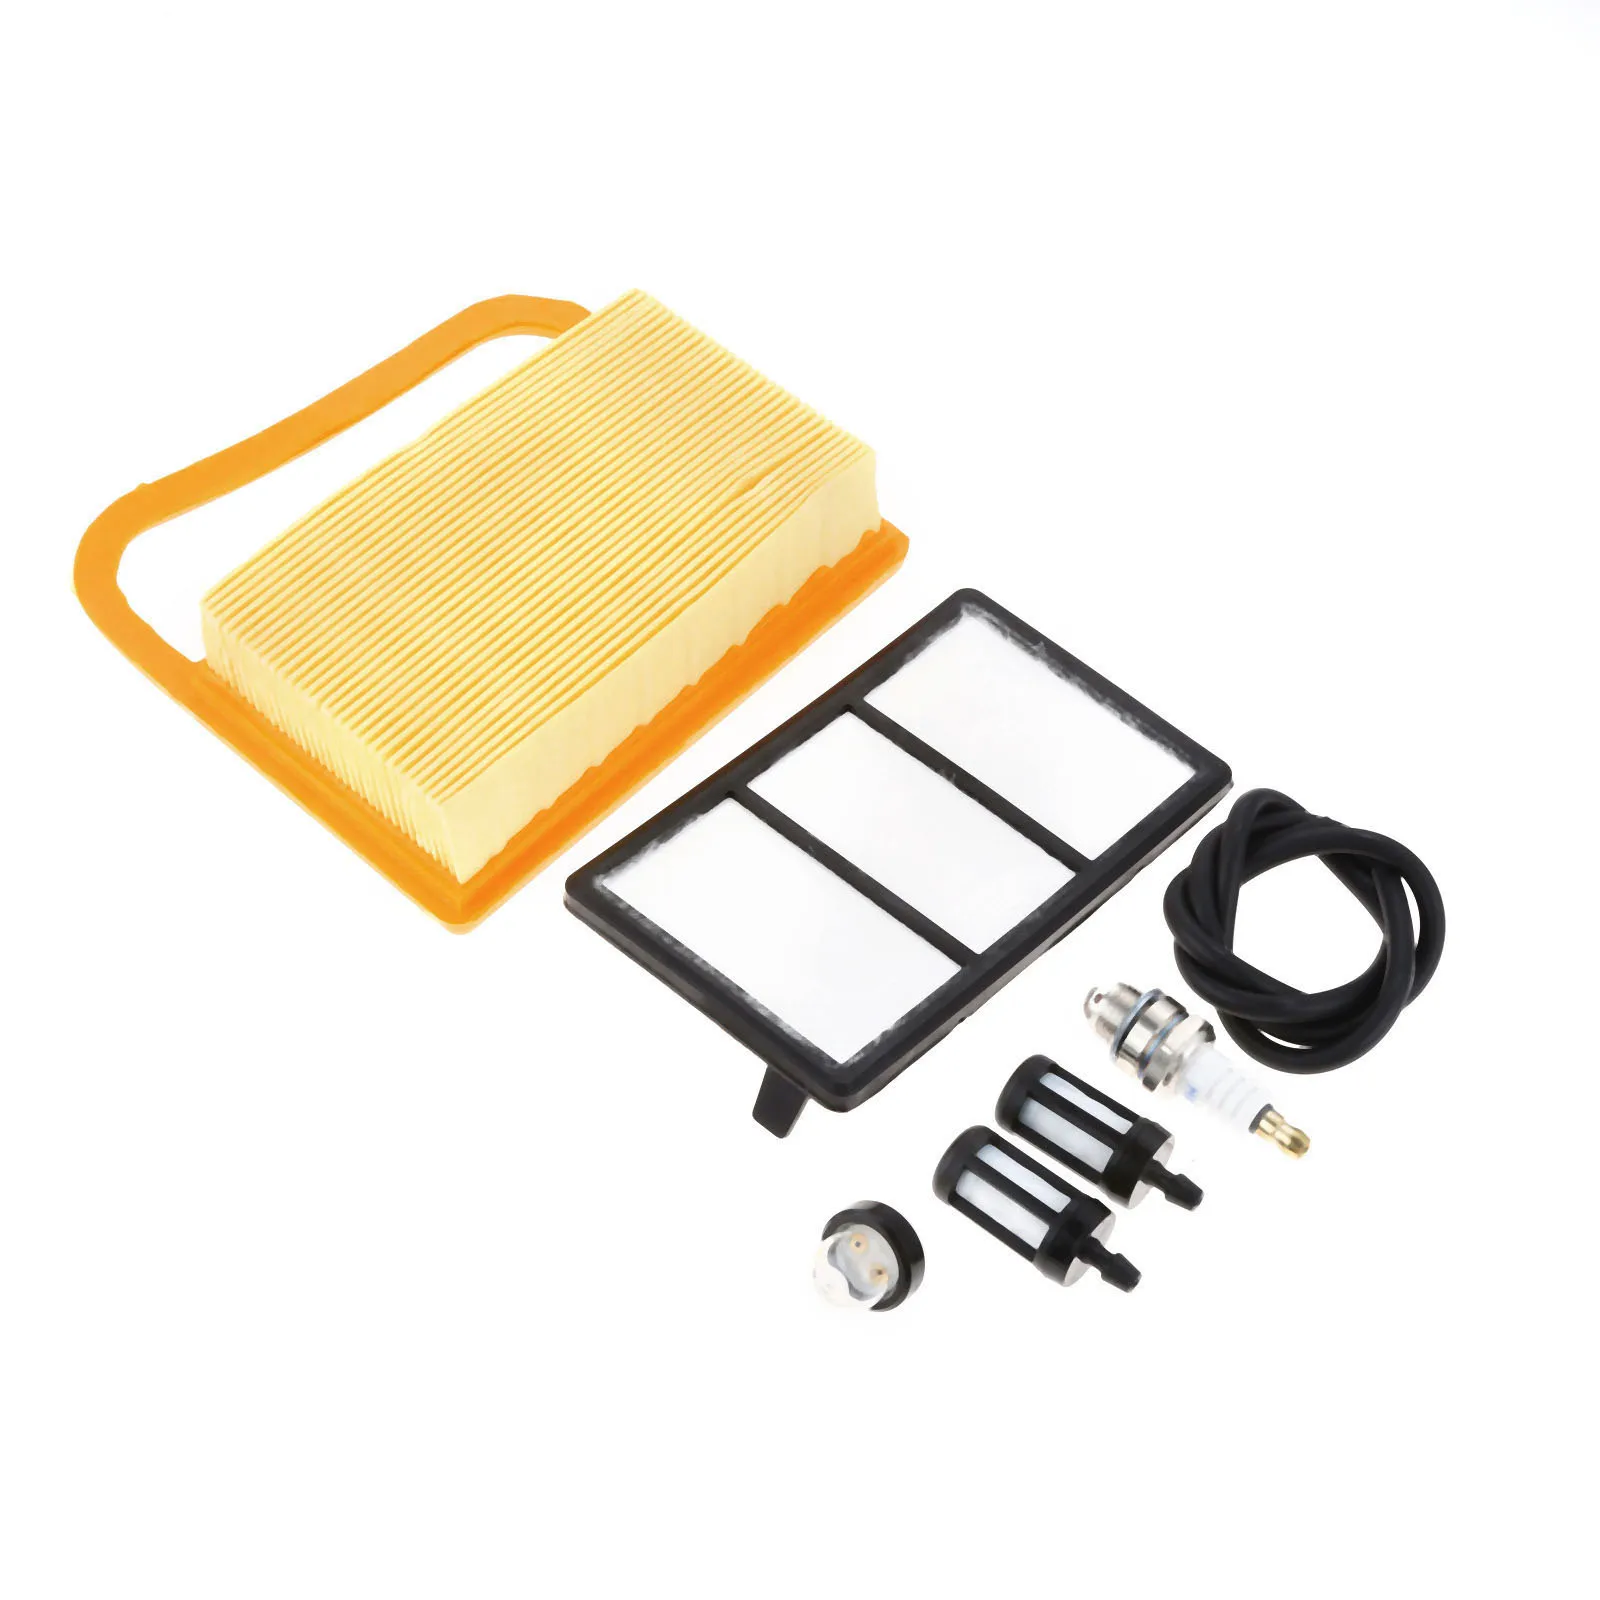 1Set Air Filter Replace 4238 140 4401 with Primer Bulb Fuel Tune Up Kit for STIHL TS410 TS410Z TS420 TS420Z Concrete Cut Off Saw